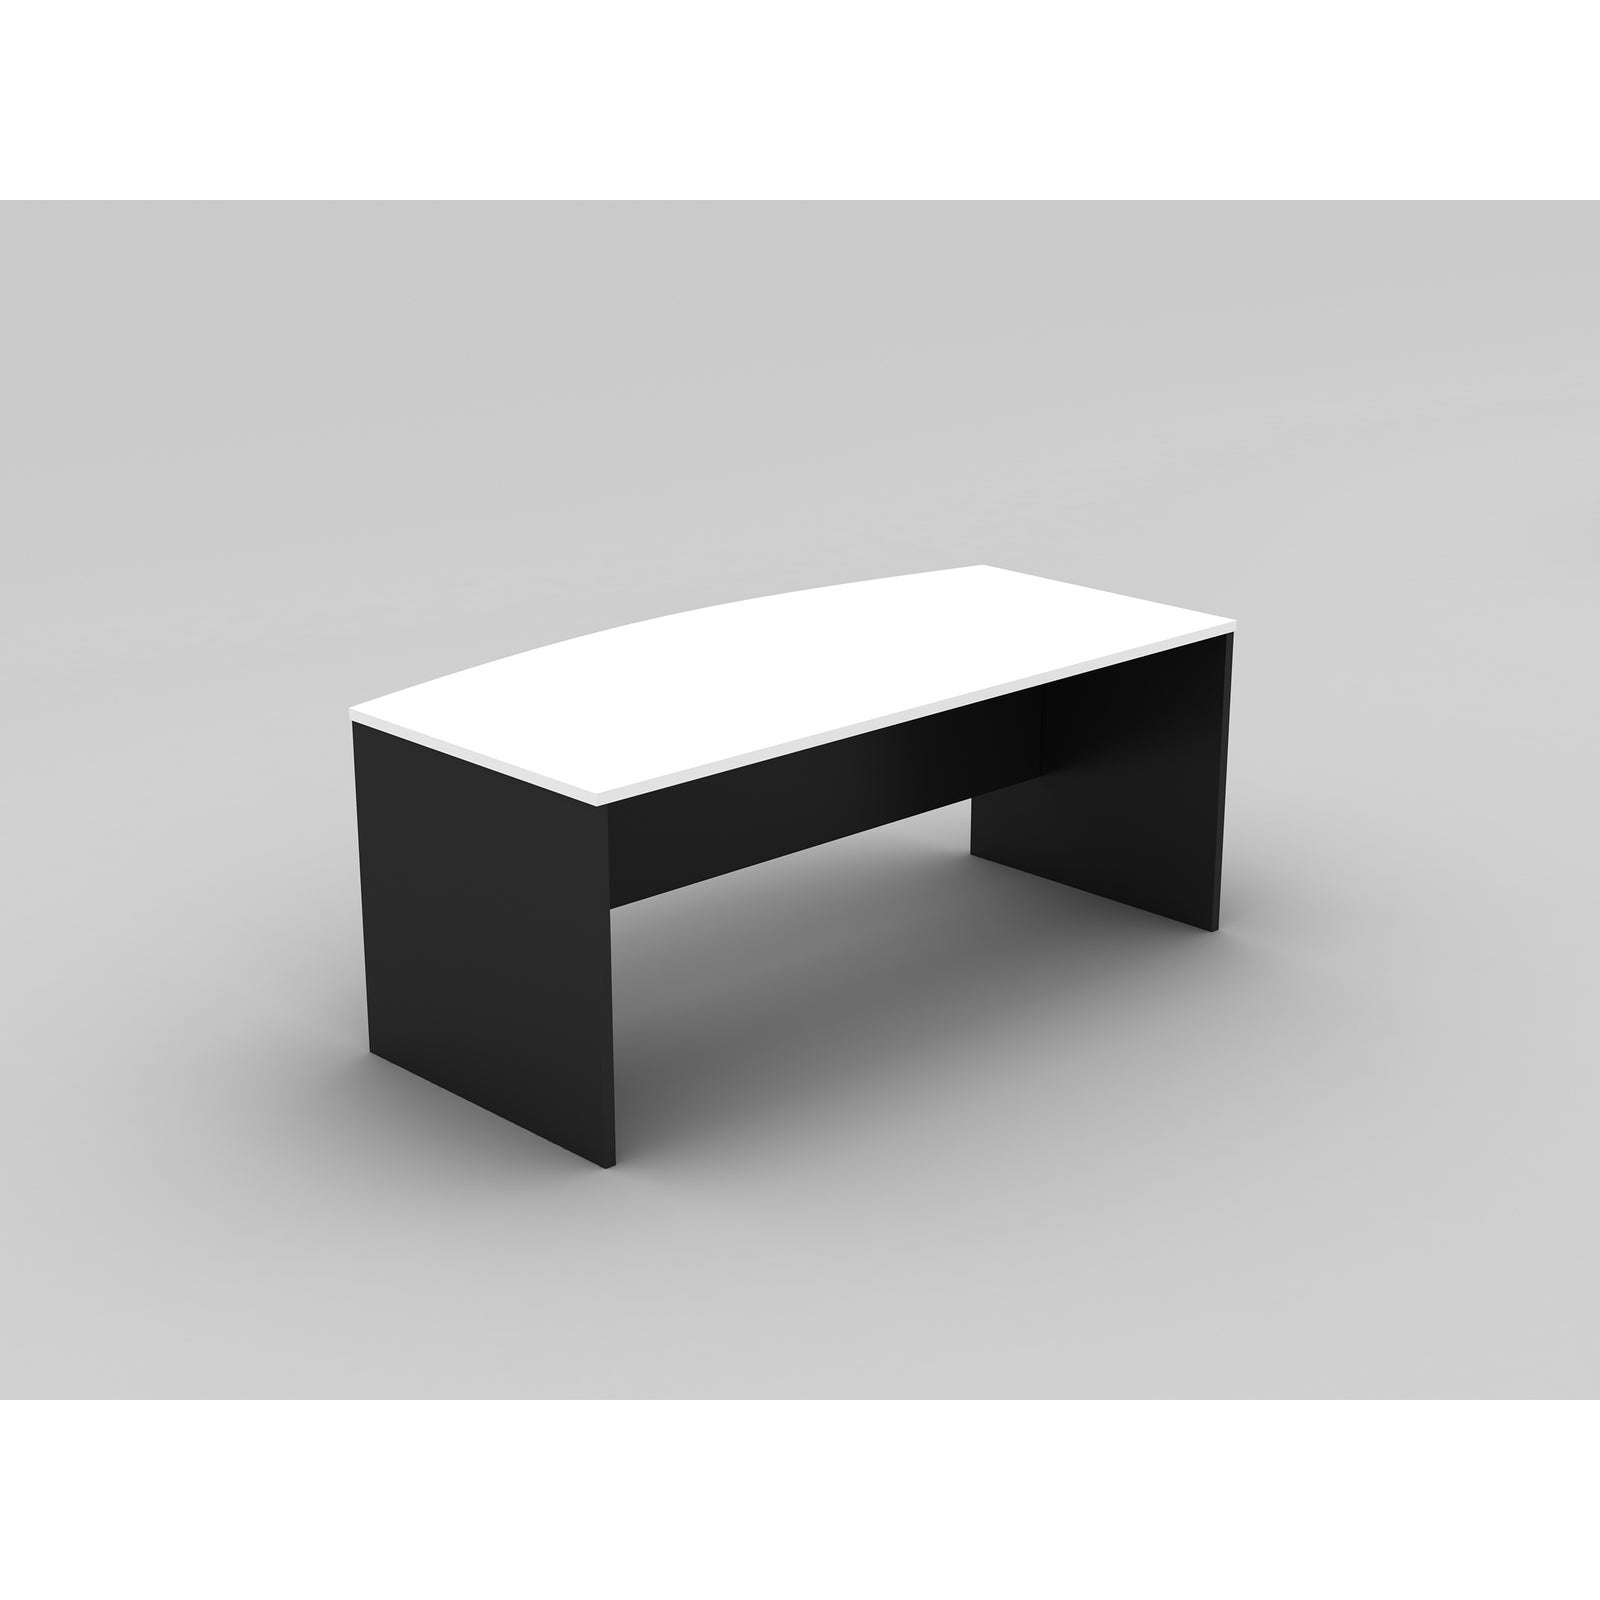 OM BOW FRONT DESK W2100 x D900/750 x H720mm White/ Charcoal